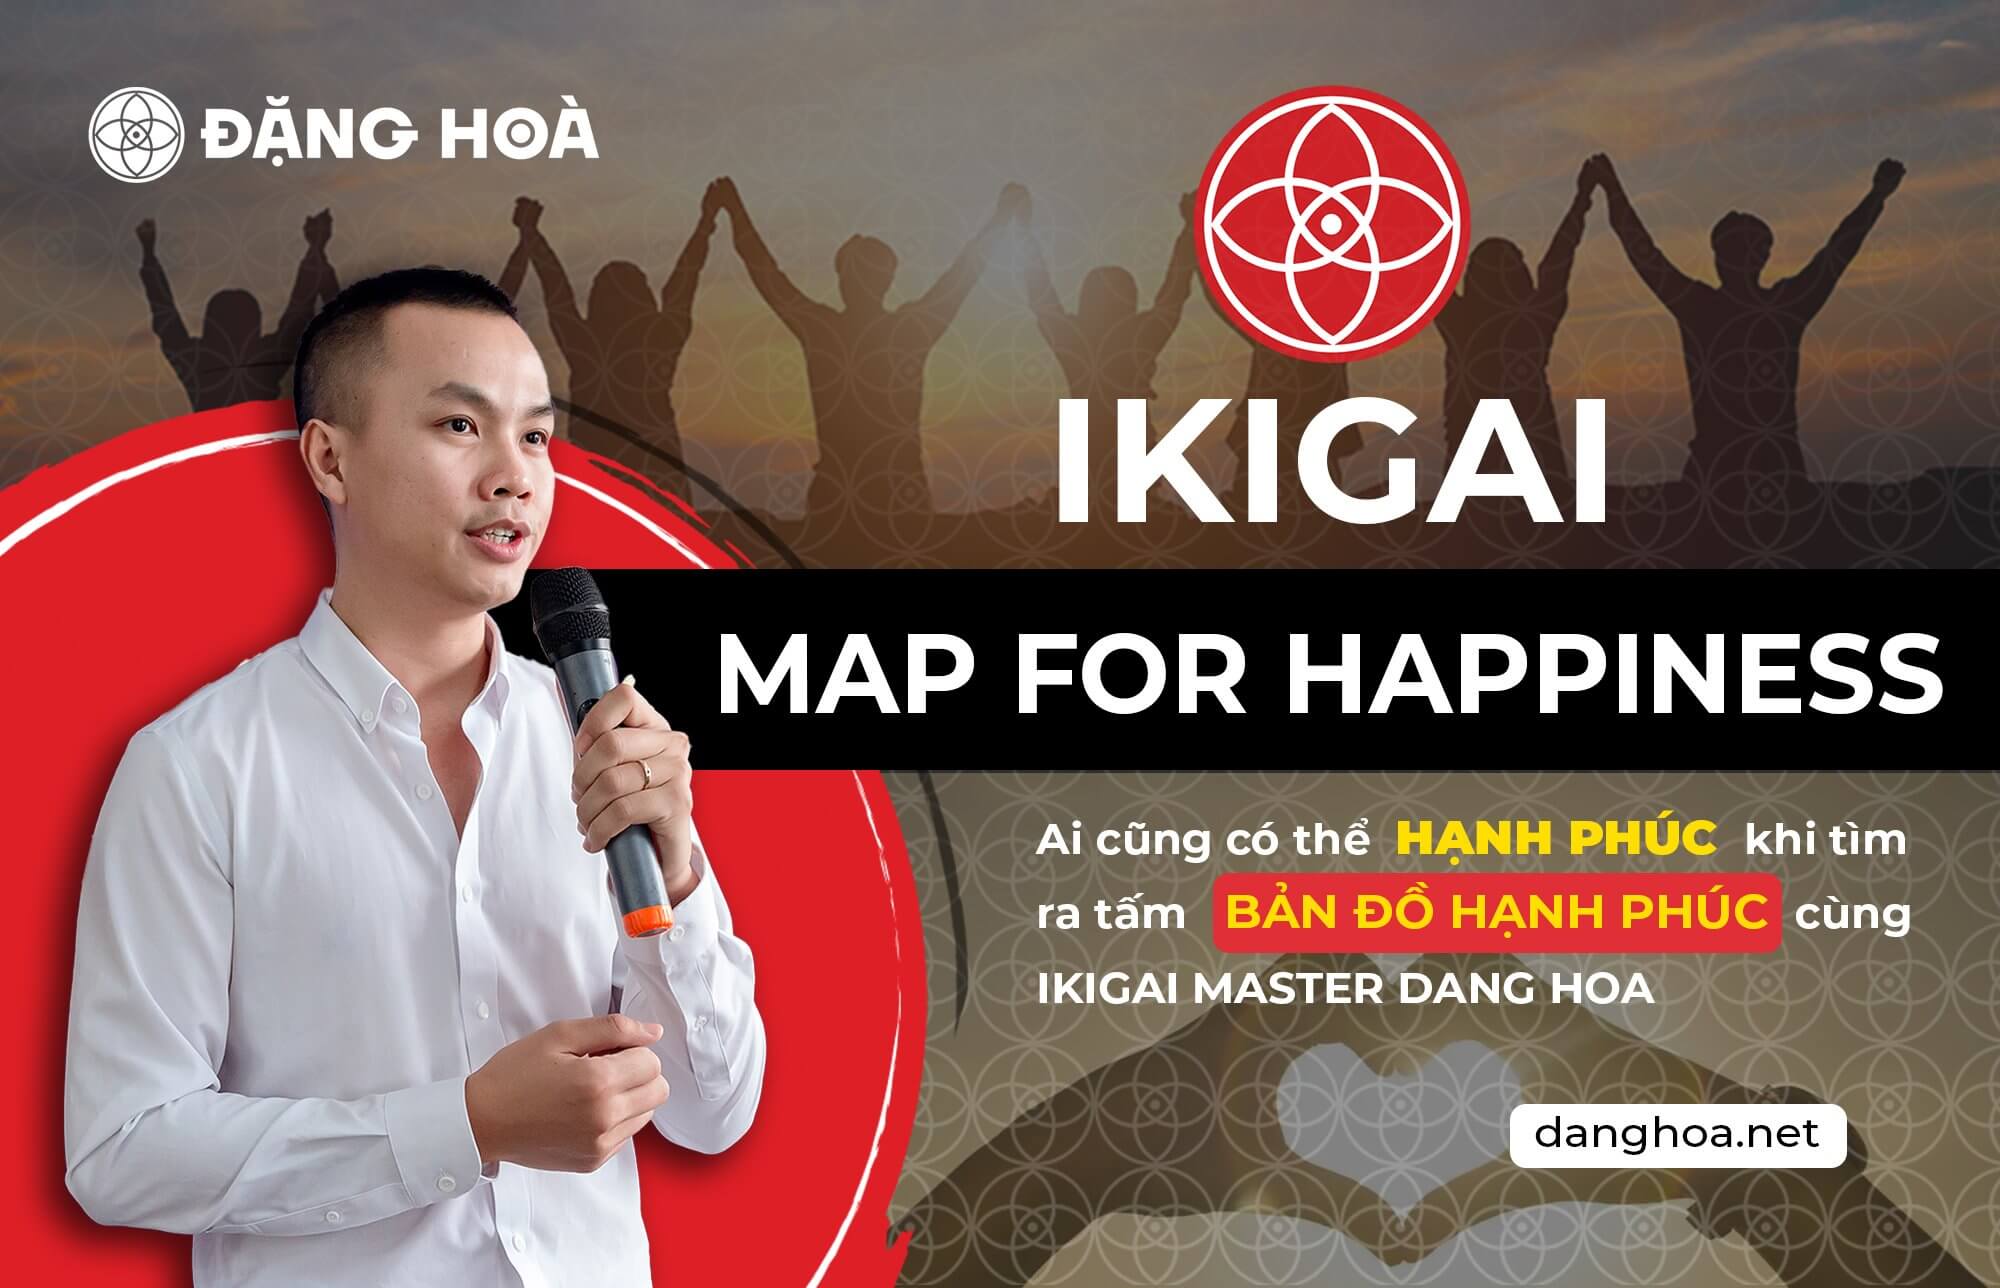 ikigai- map for happiness